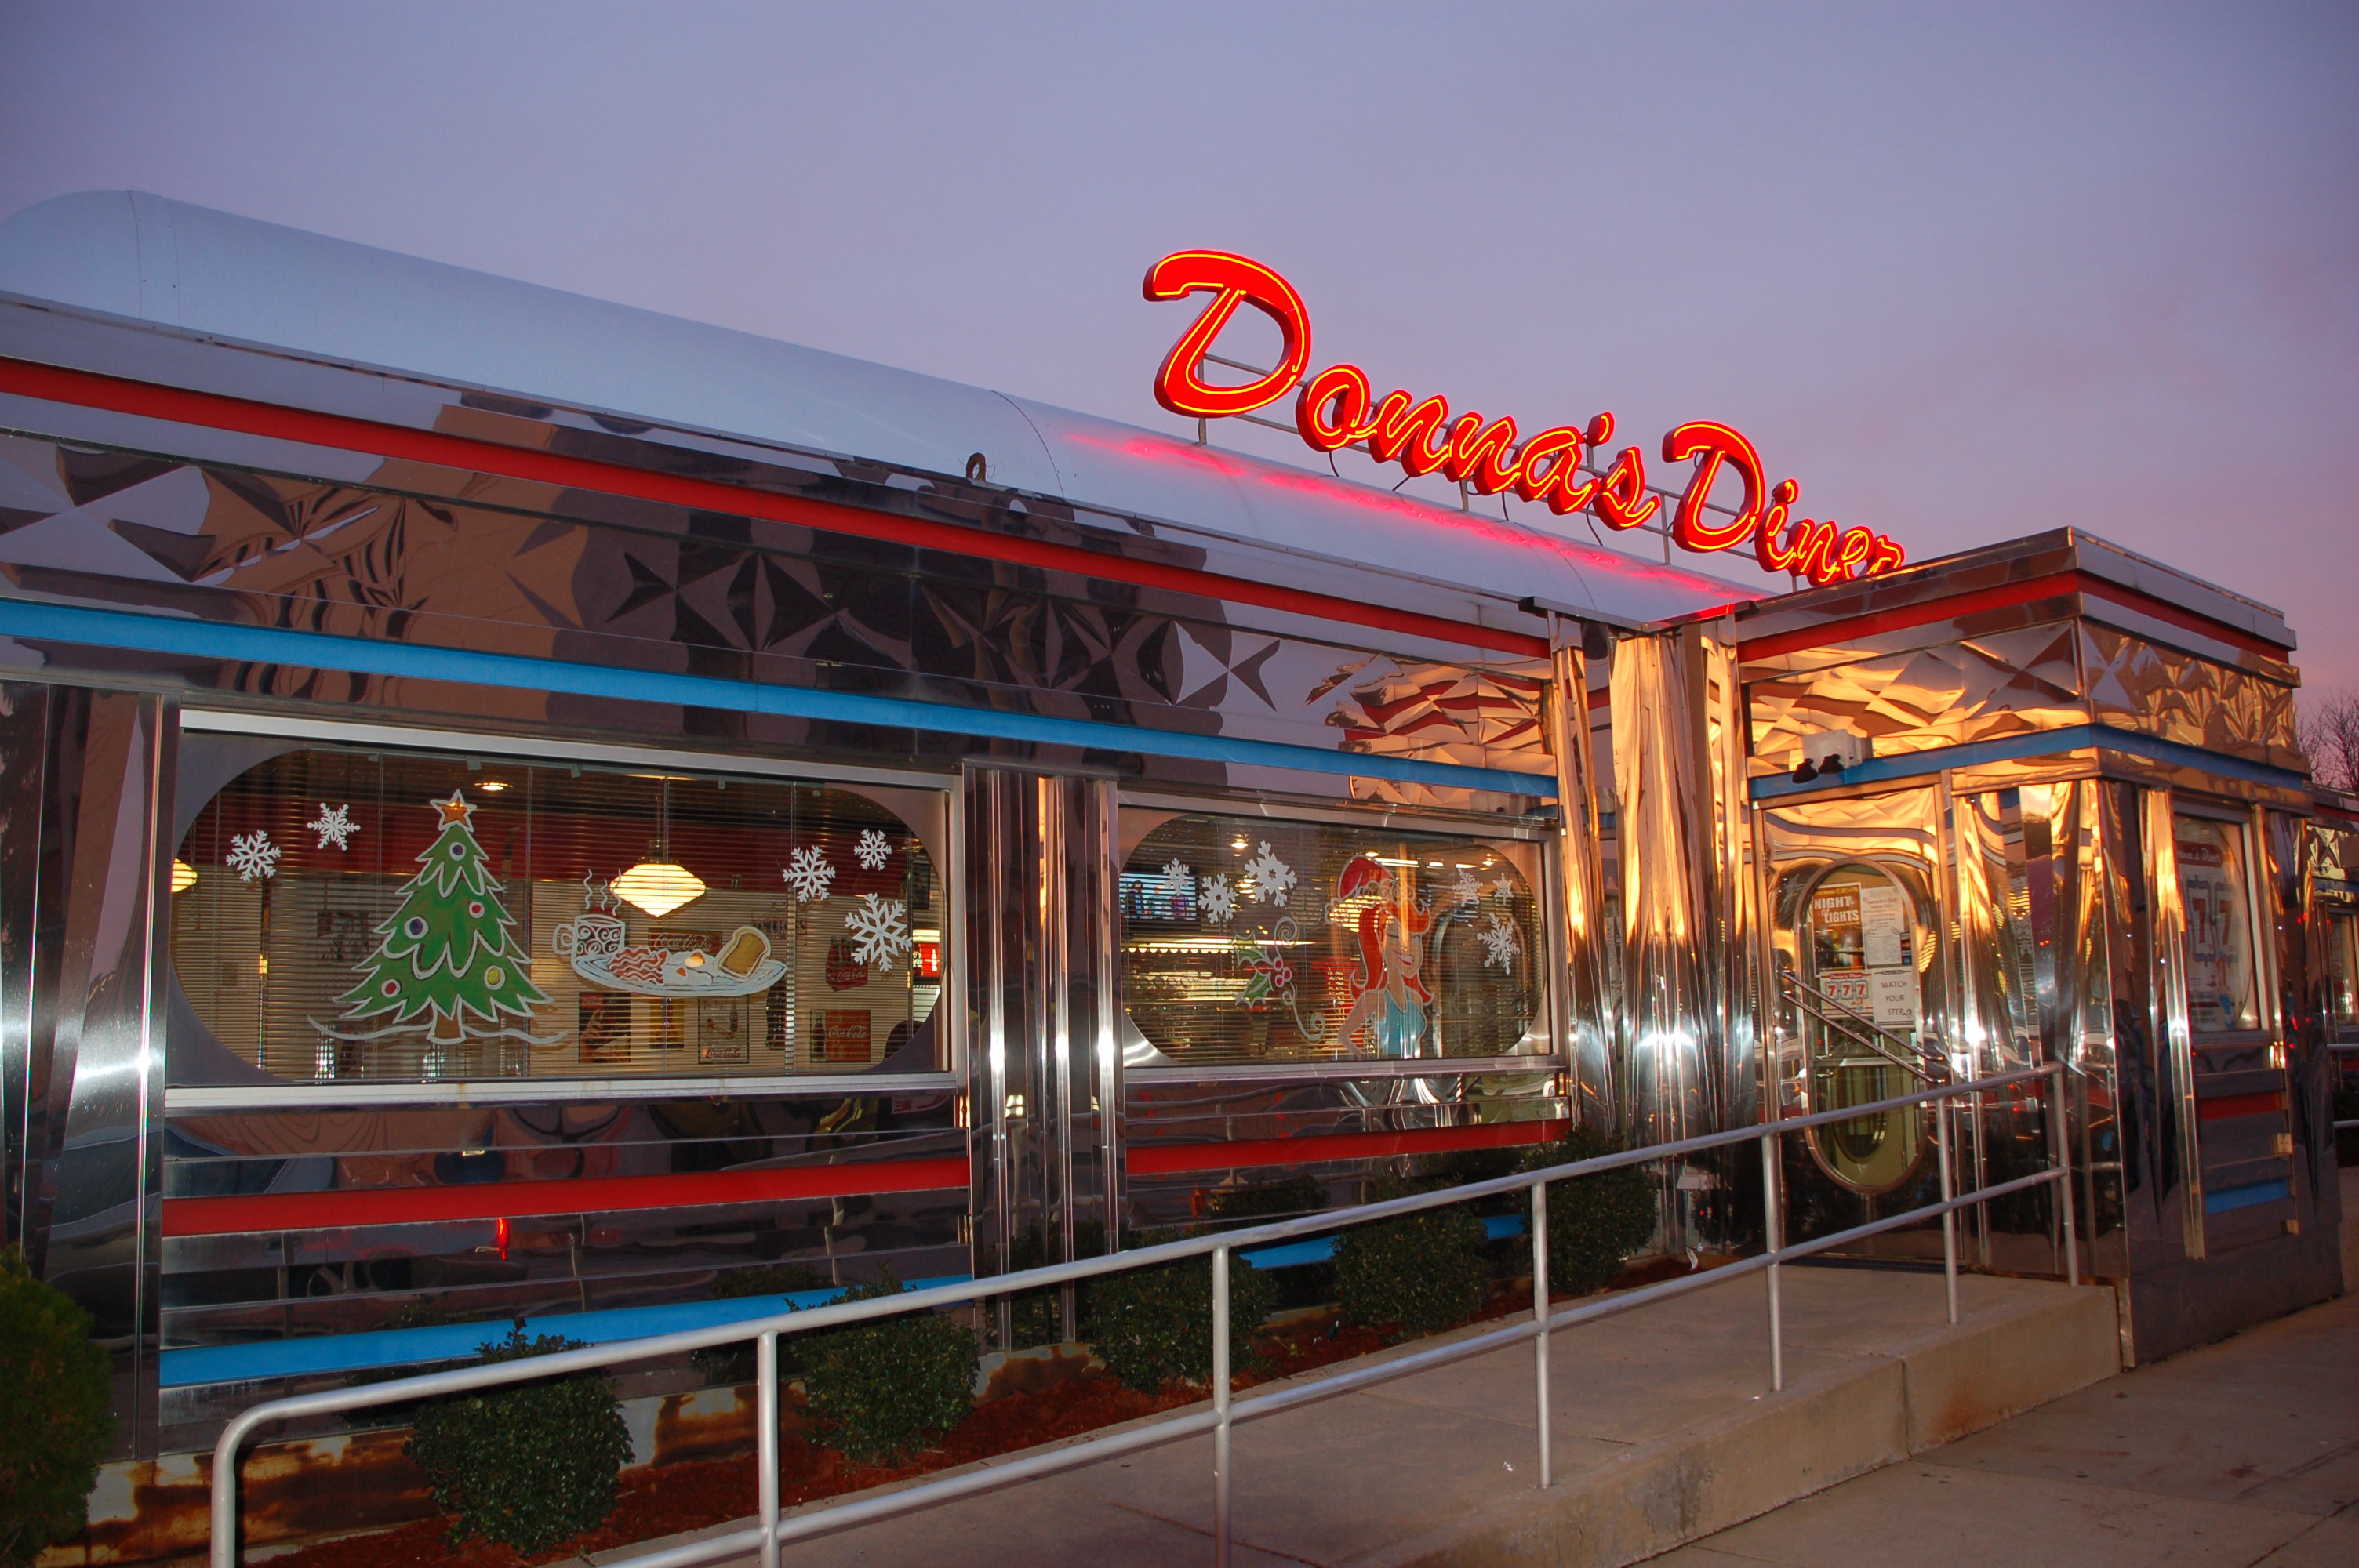 Donna's Diner - Old Fashioned 50s Diner Food for Breakfast, Lunch and